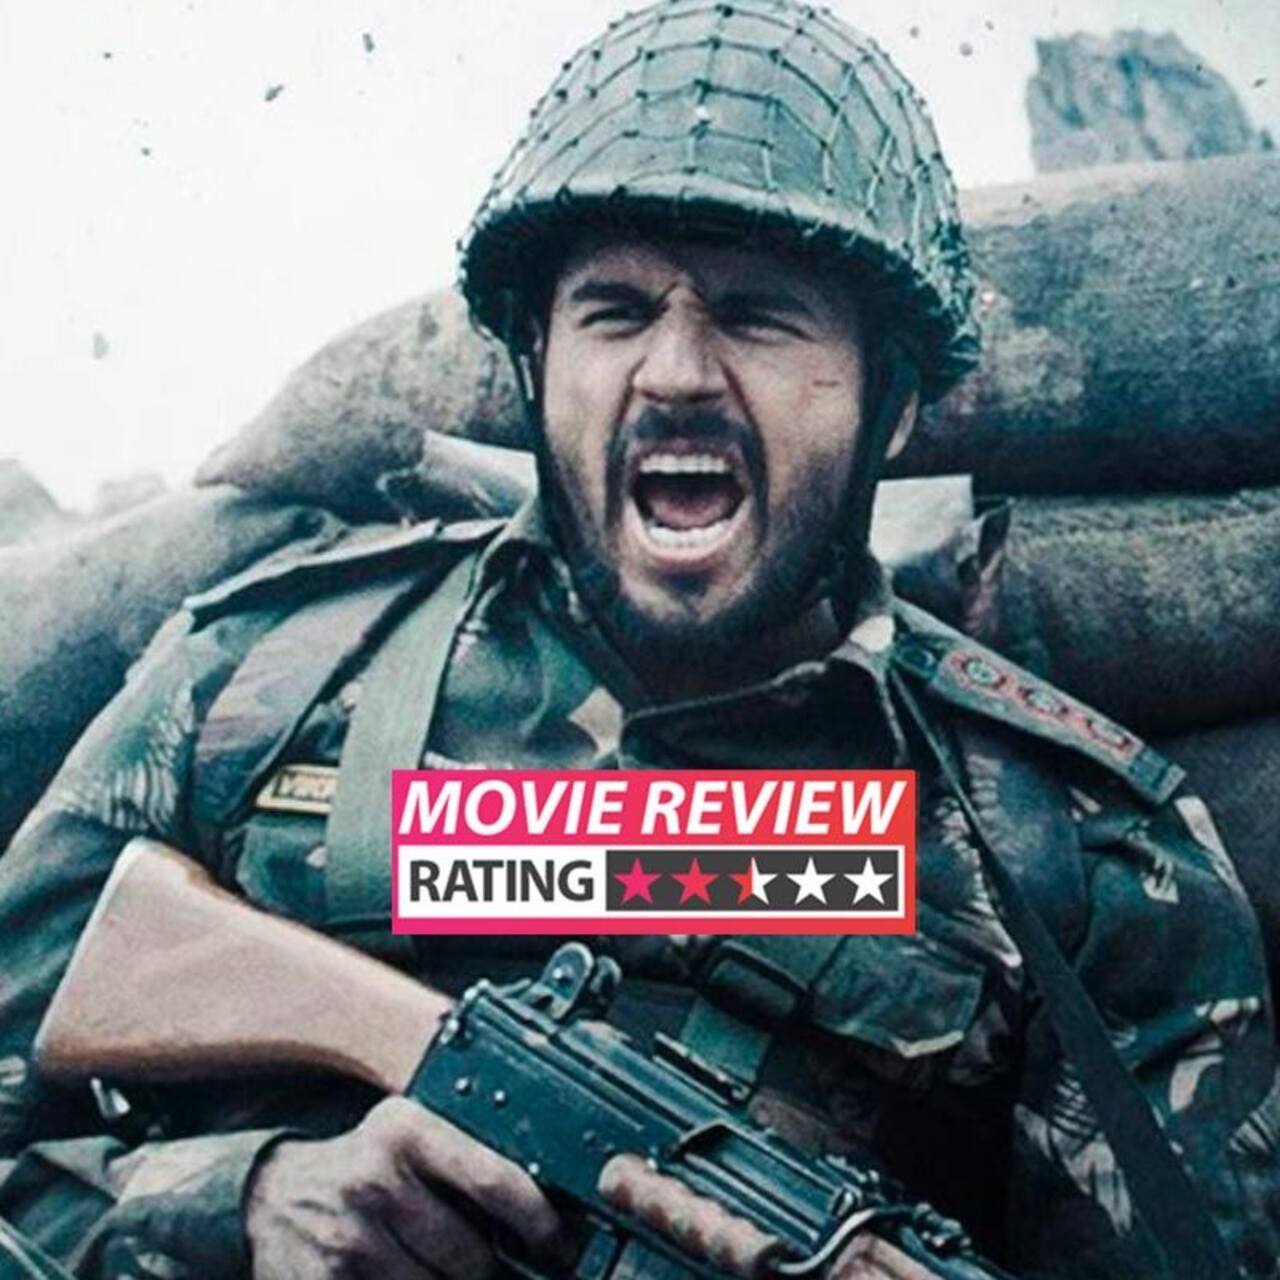 Shershaah movie review: Sidharth Malhotra, Kiara Advani's war drama gets diluted by unnecessary romantic interludes